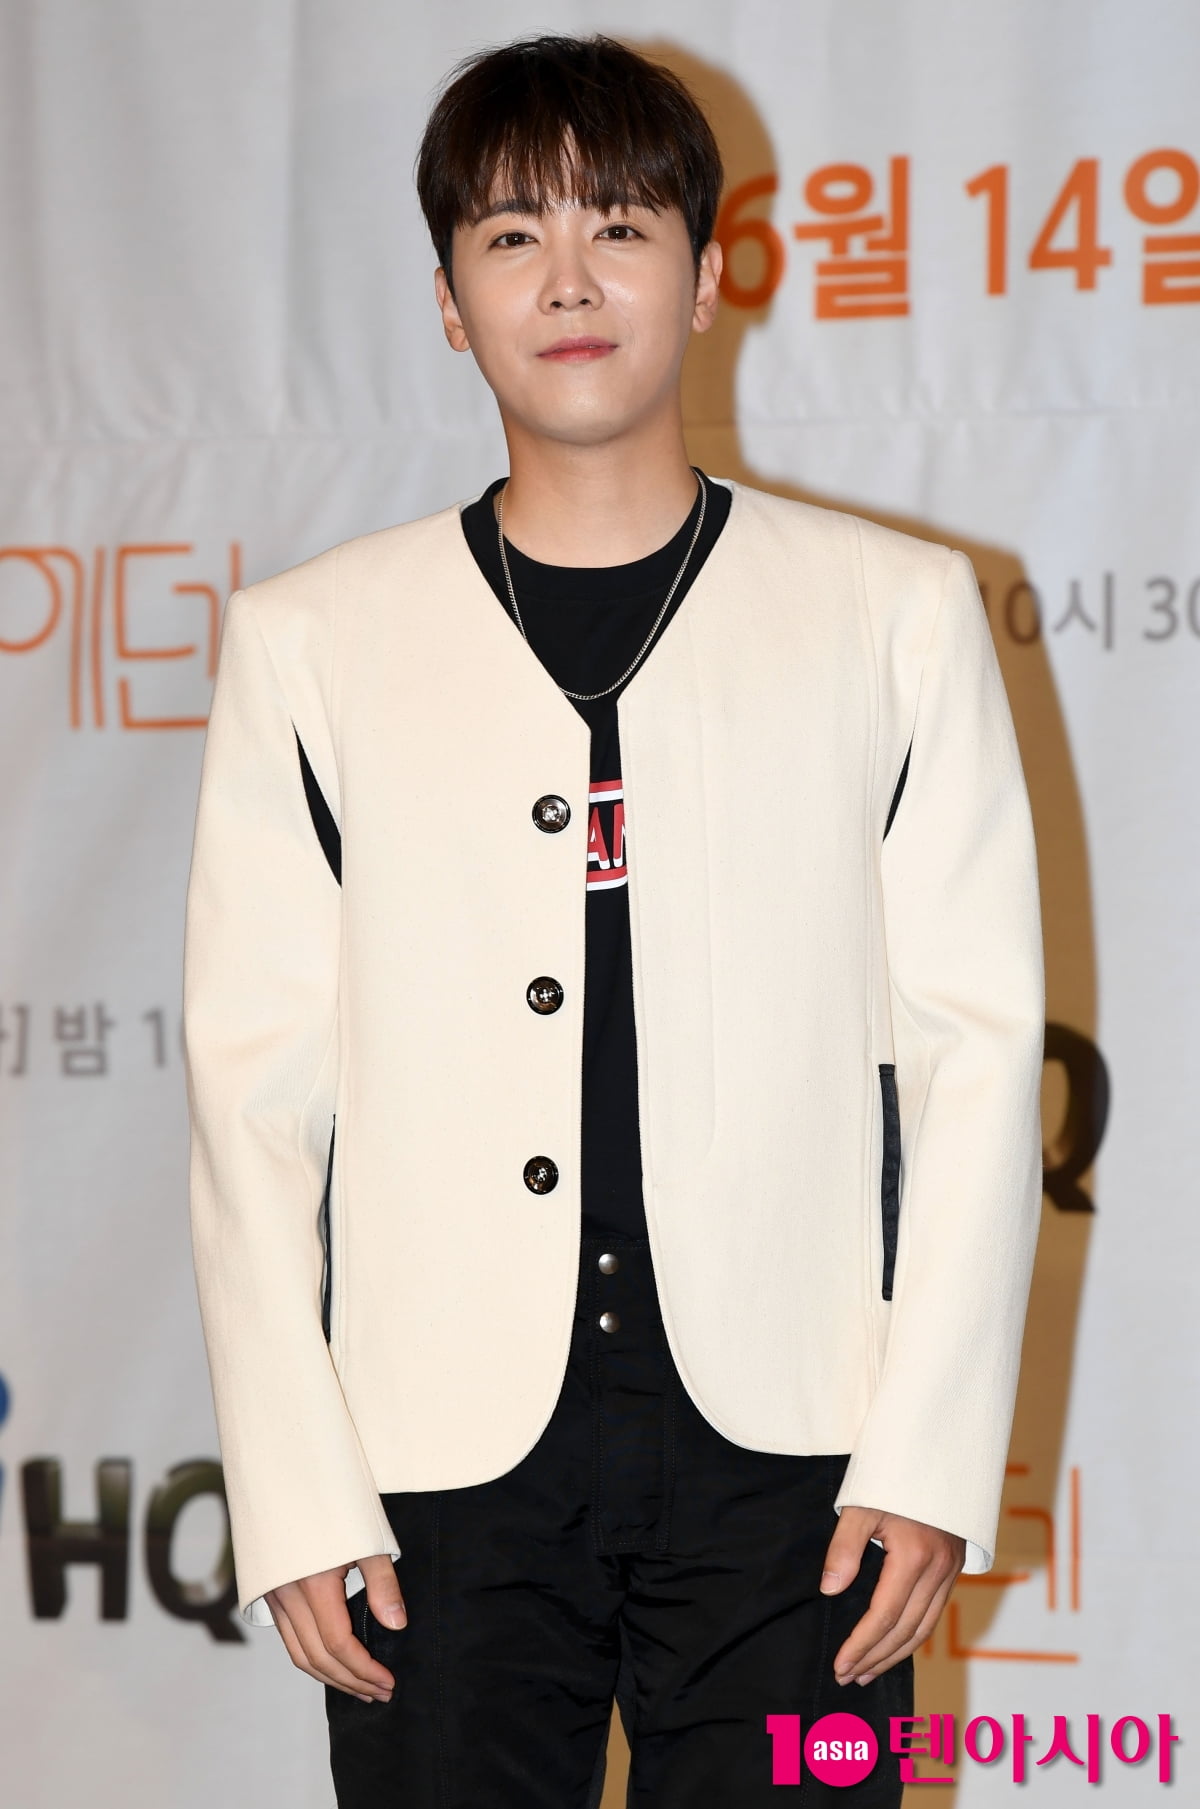 Lee Hong-ki confesses to a rare disease, "There is no cure for hidradenitis suppurativa... I even canceled the concert."